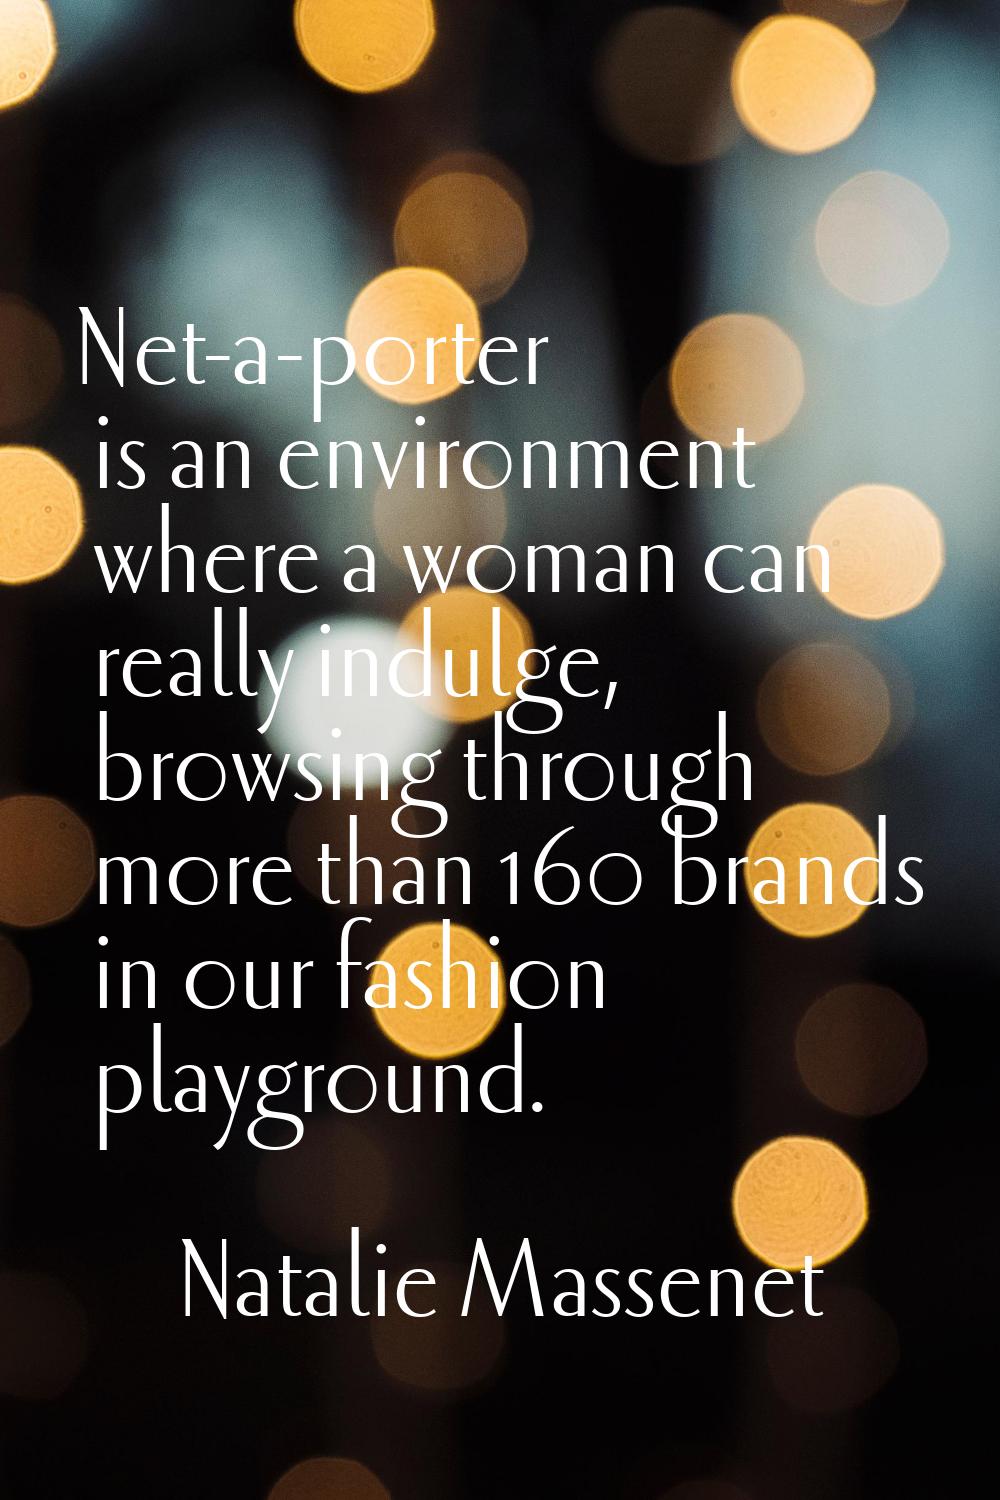 Net-a-porter is an environment where a woman can really indulge, browsing through more than 160 bra